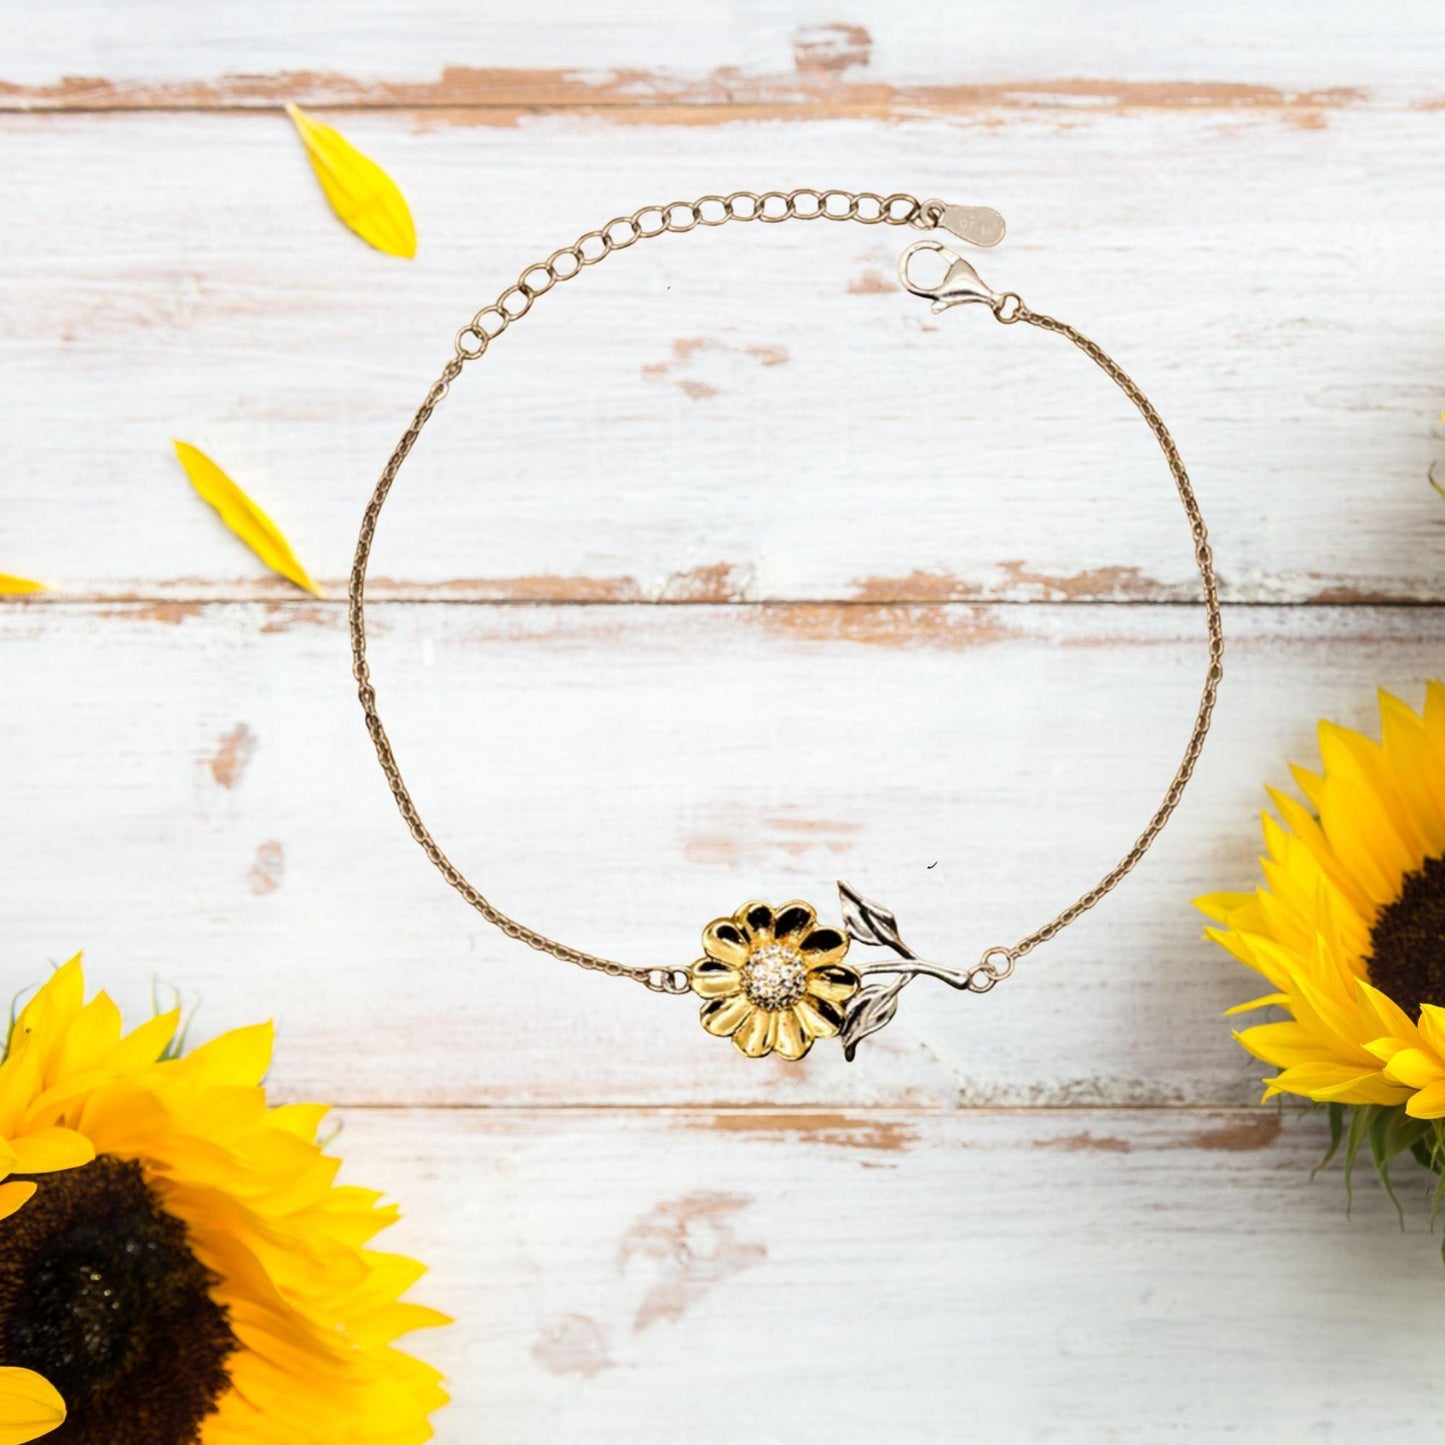 Remarkable Loan Officer Gifts, Your dedication and hard work, Inspirational Birthday Christmas Unique Sunflower Bracelet For Loan Officer, Coworkers, Men, Women, Friends - Mallard Moon Gift Shop